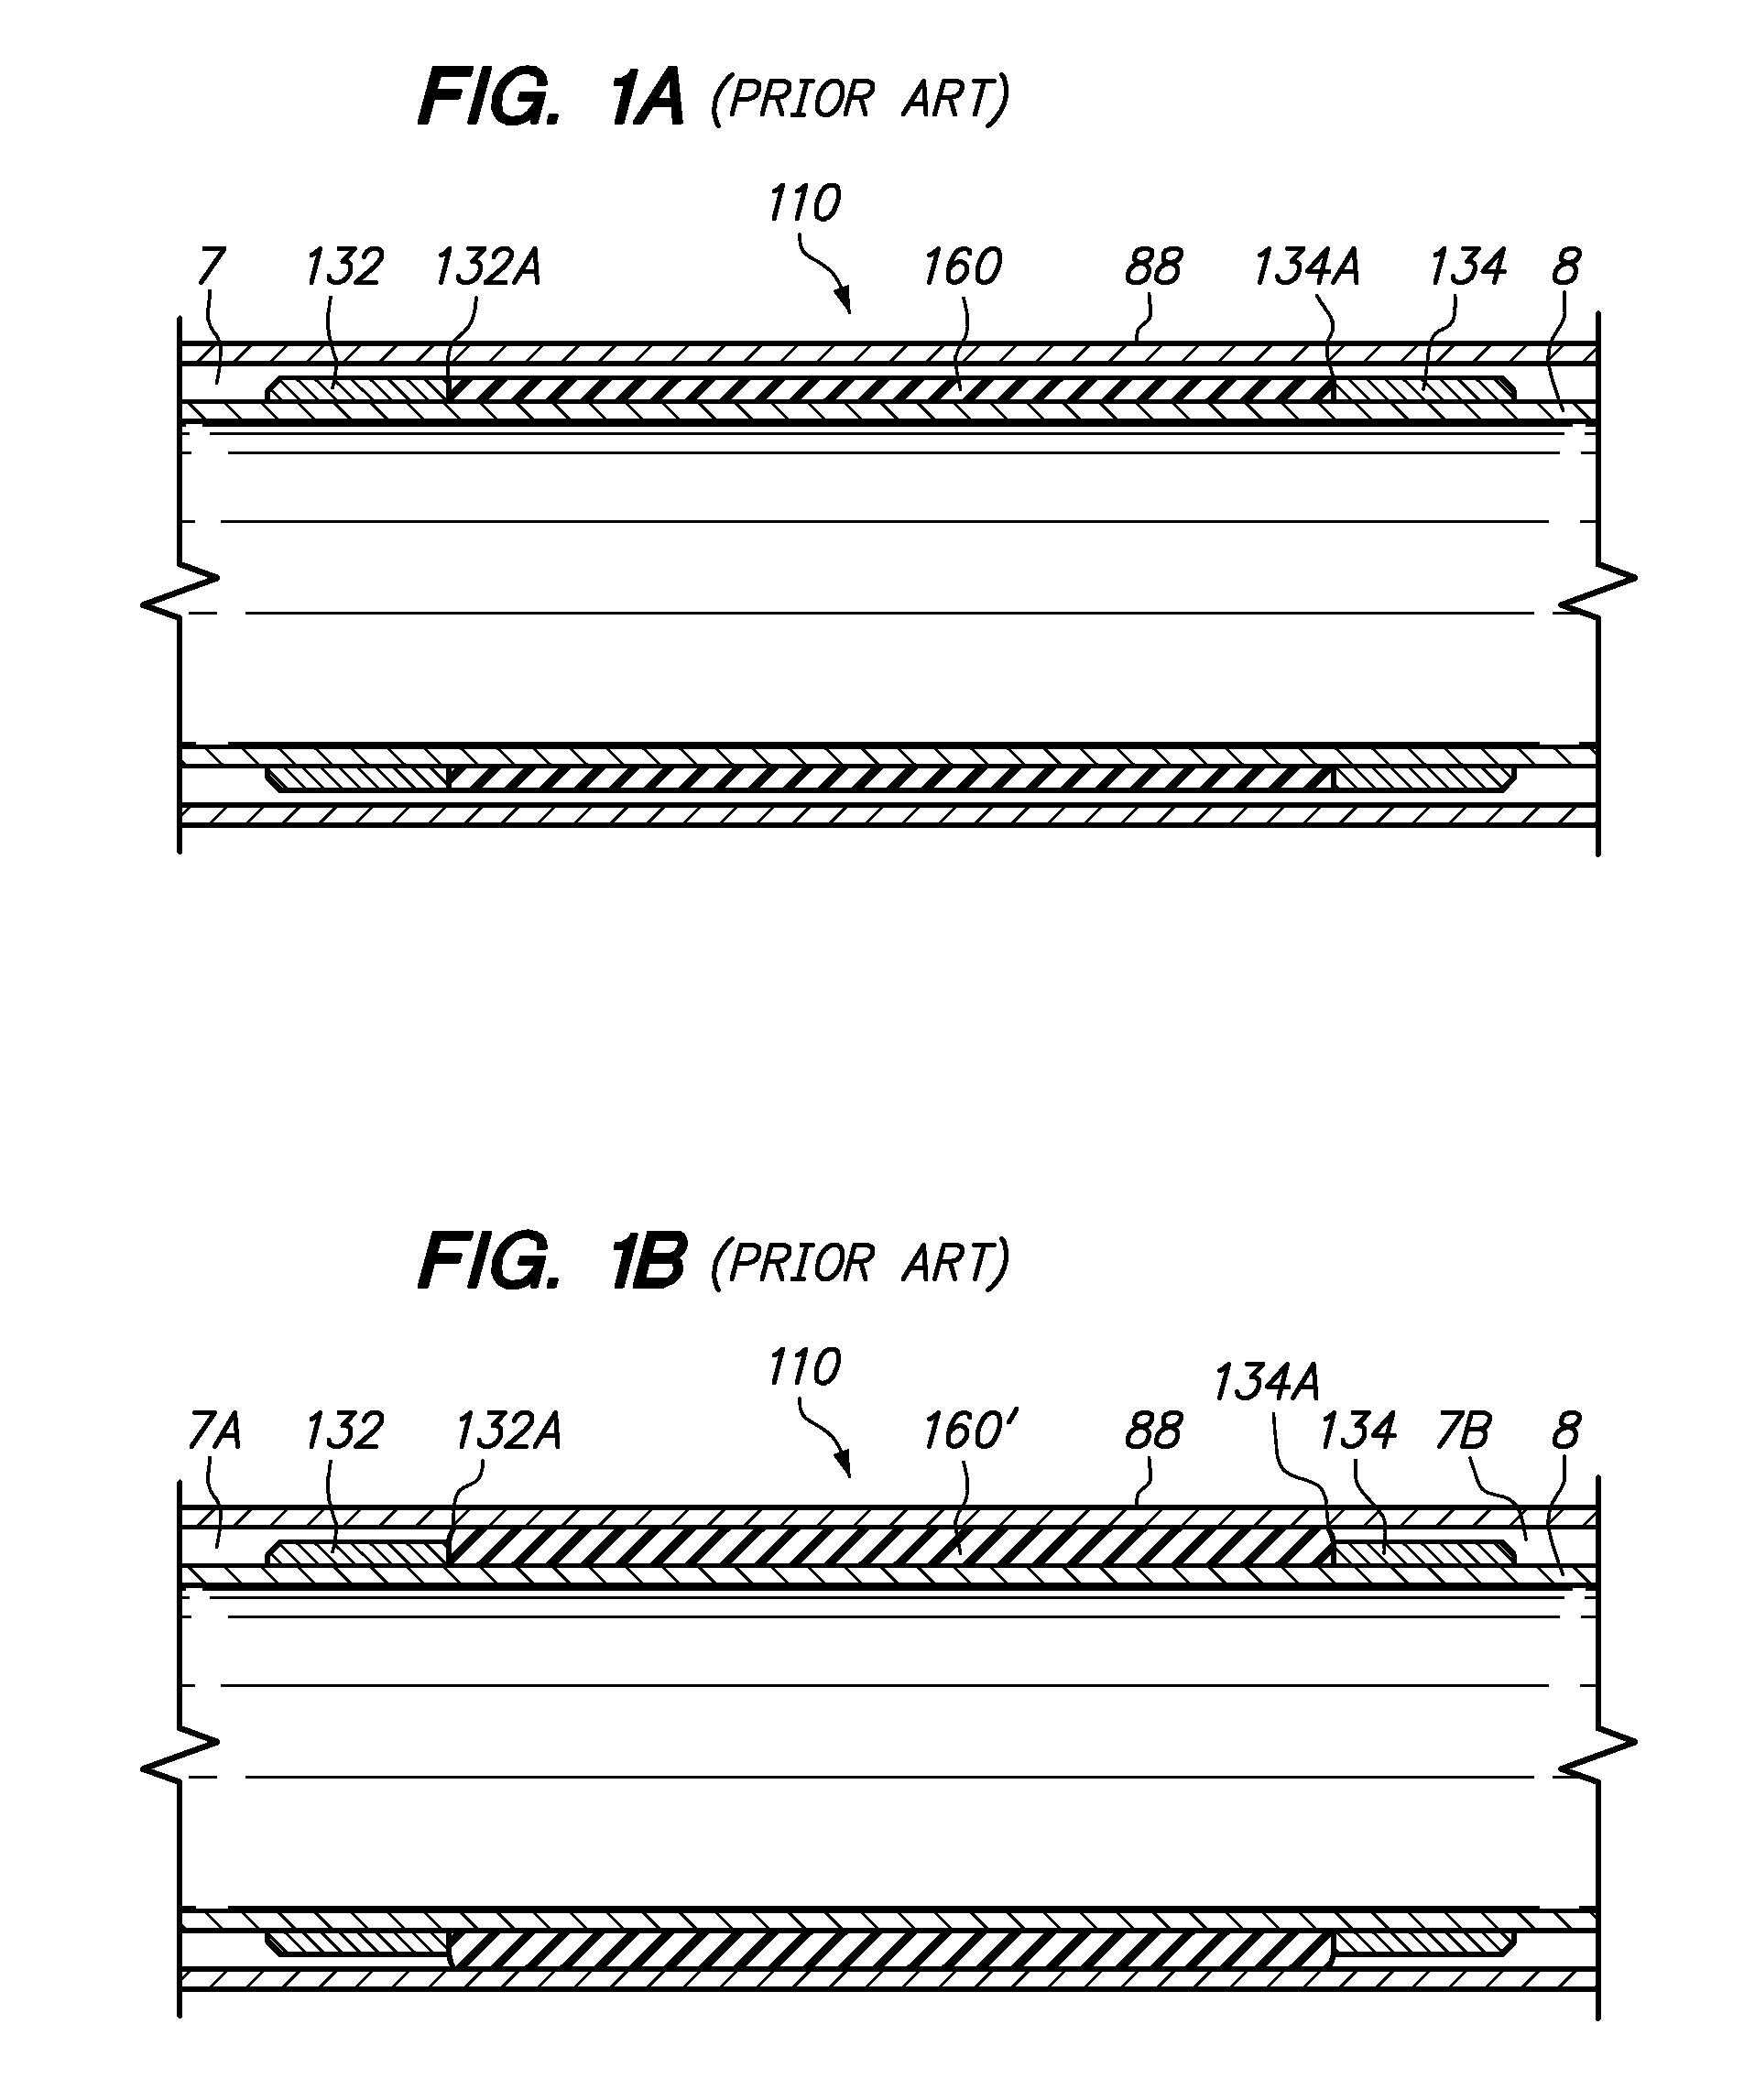 Interference-fit stop collar and method of positioning a device on a tubular